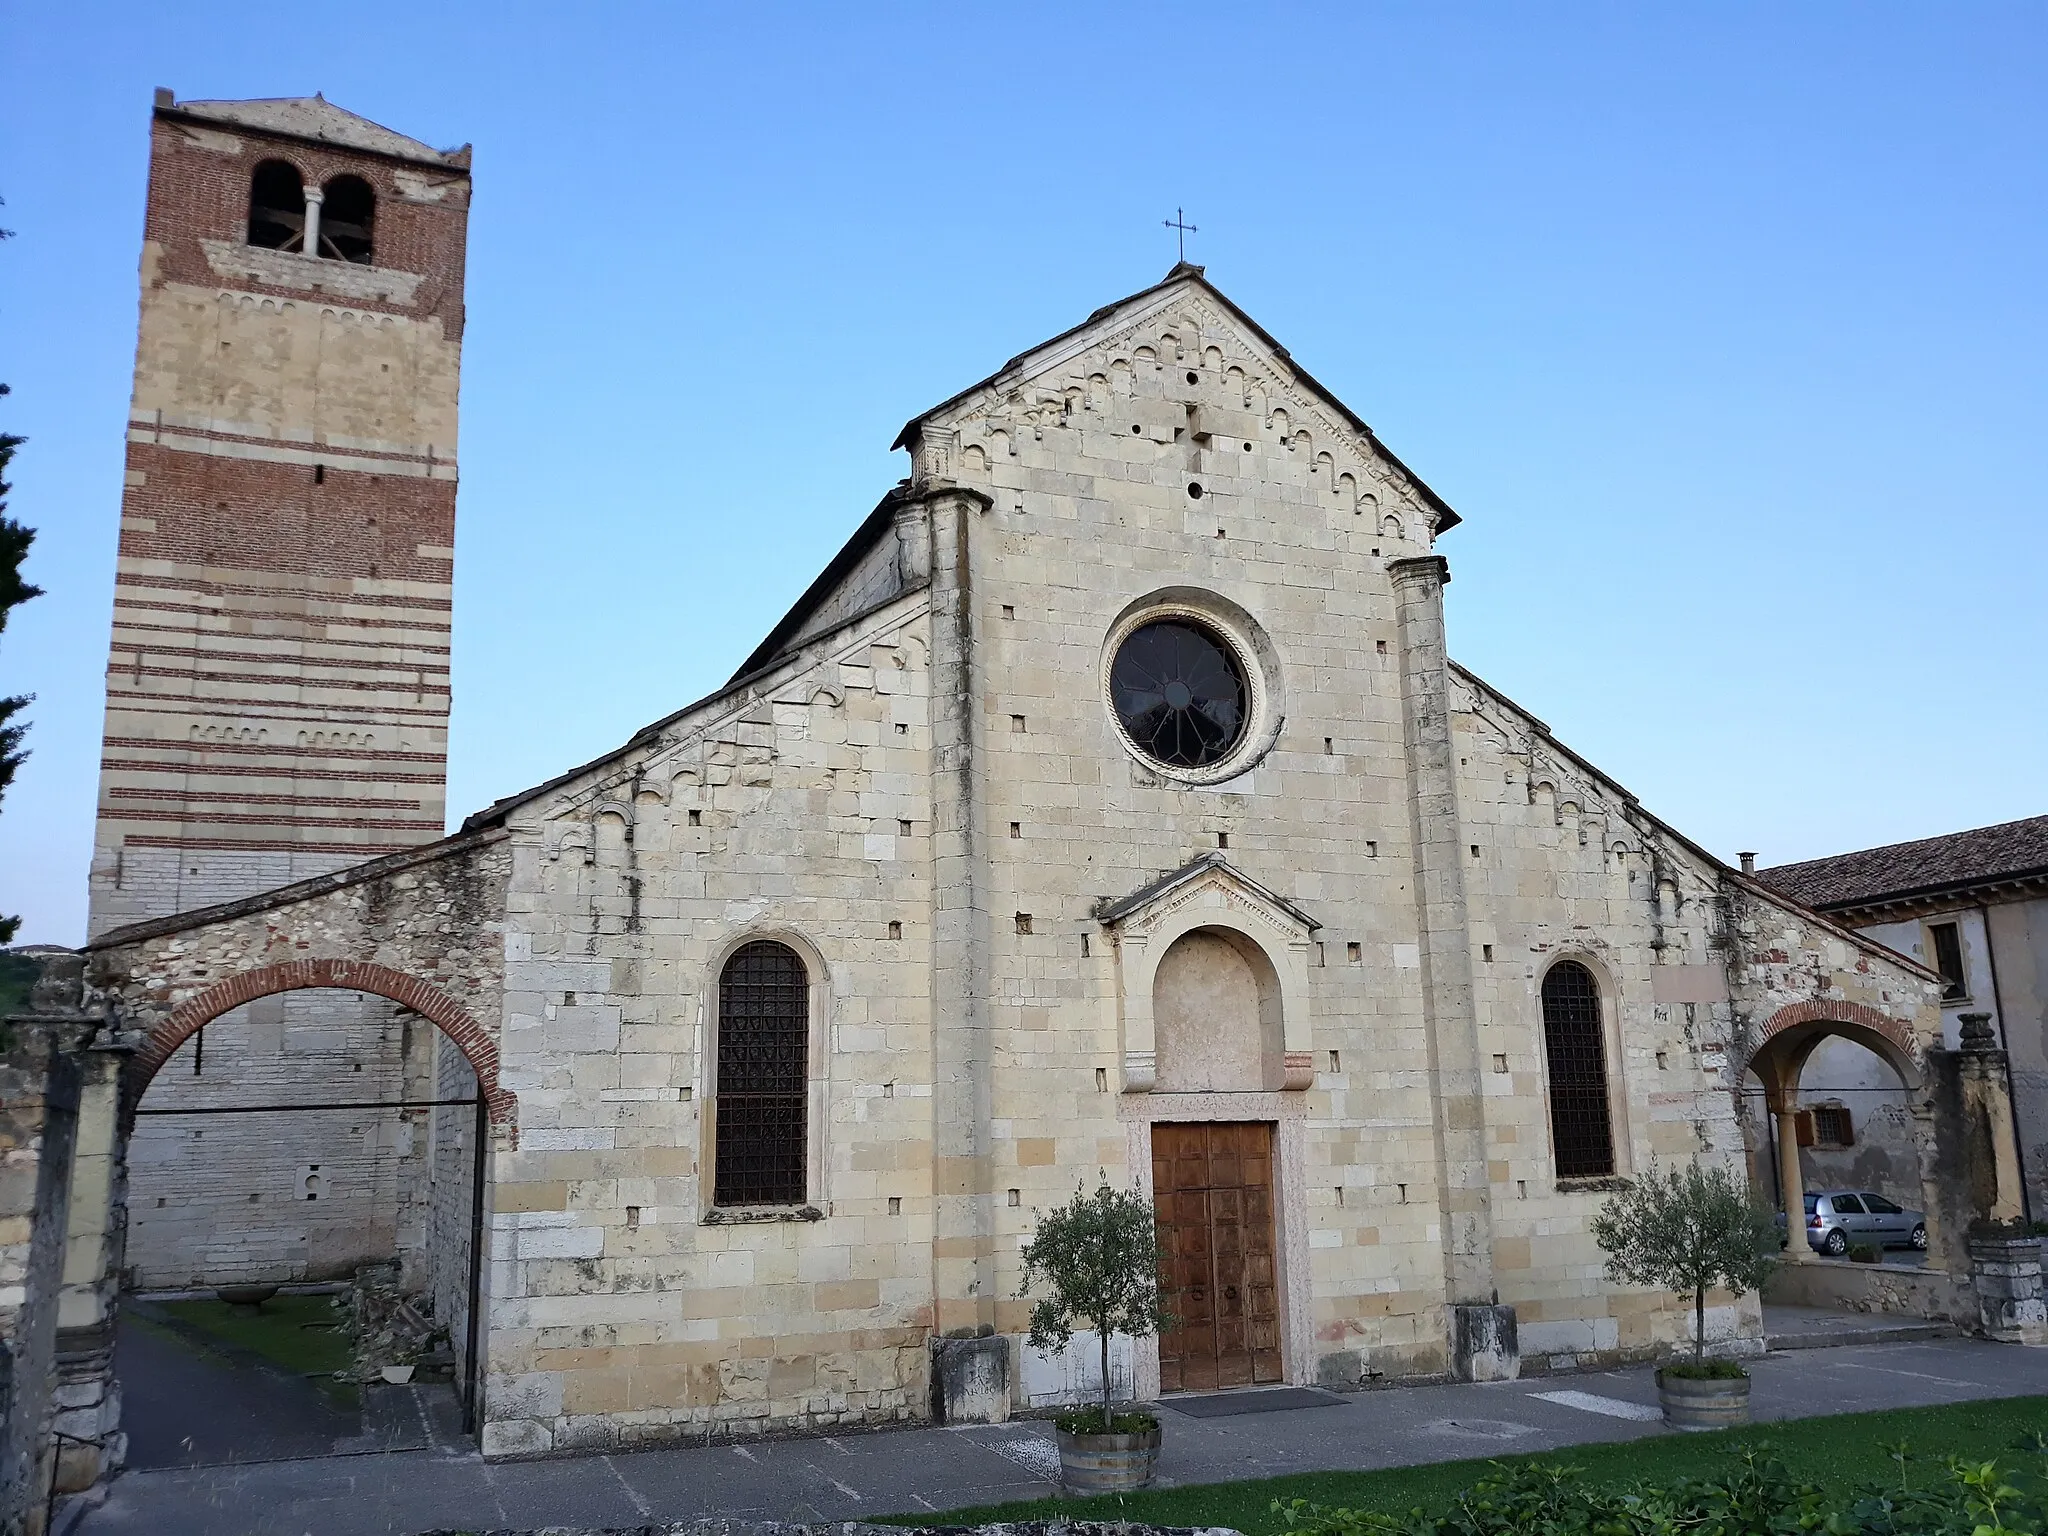 Image of San Floriano